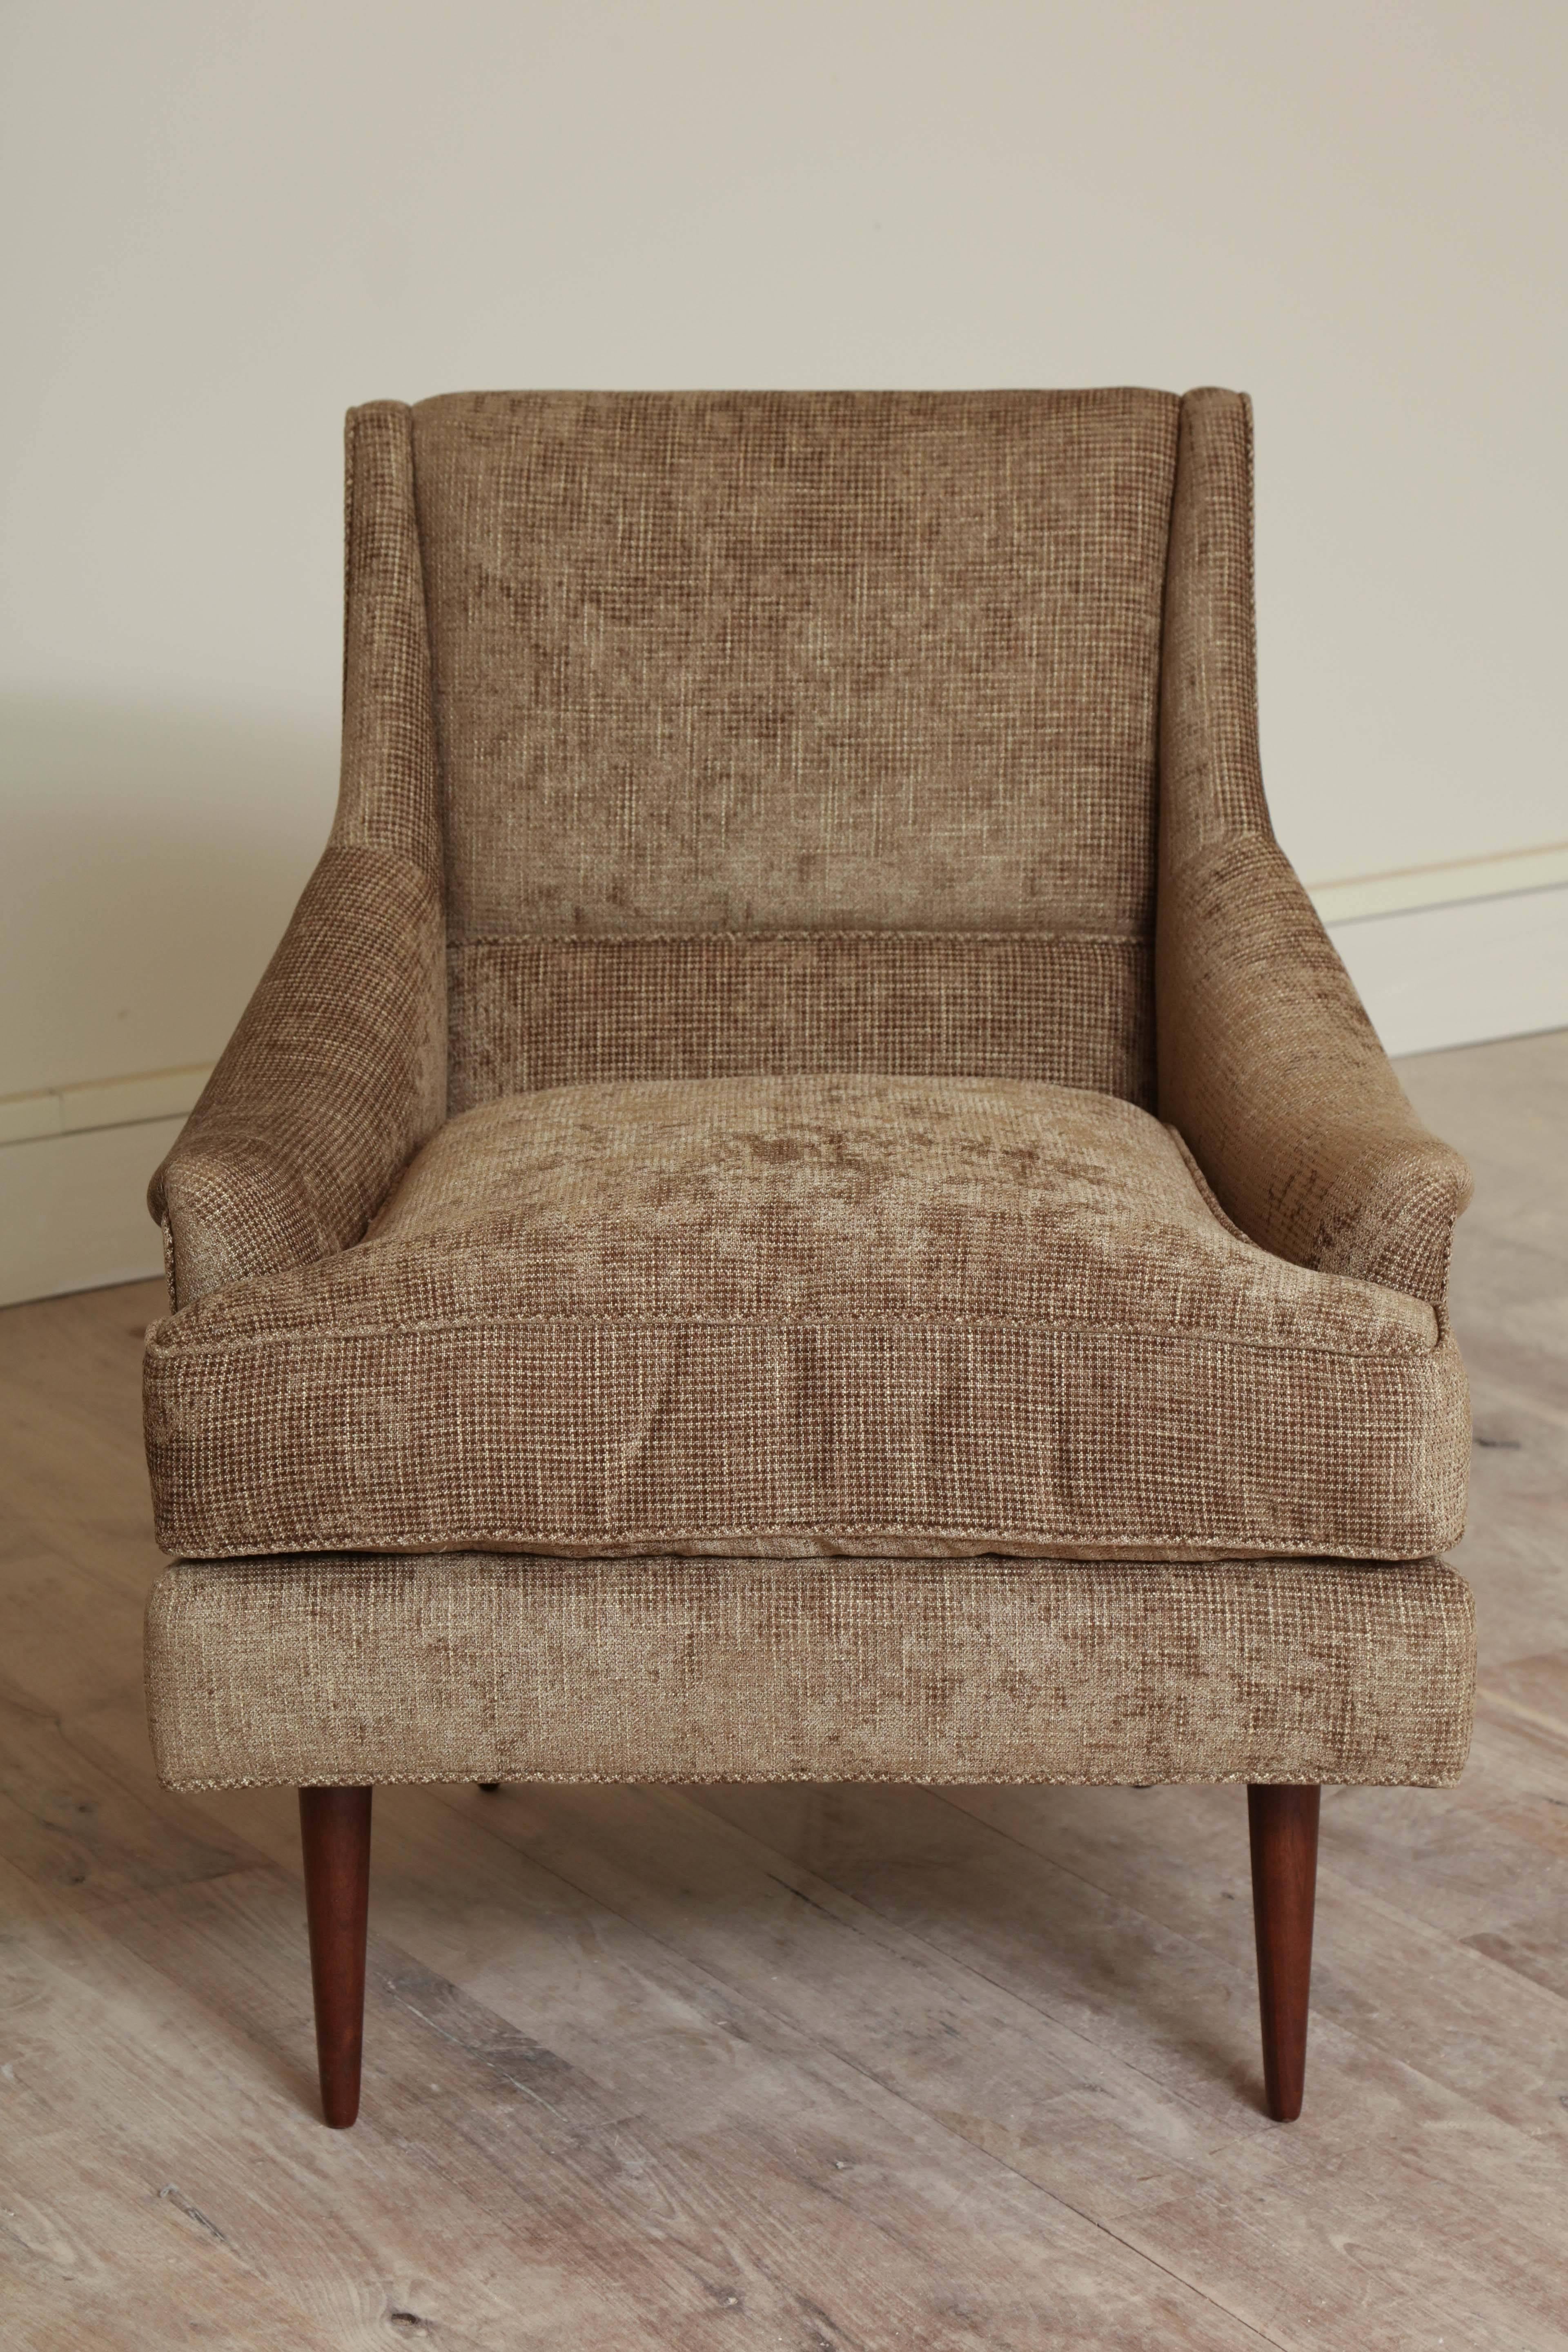 Armchair in the manner of Paul McCobb, circa 1960 upholstered in mink check chenille.